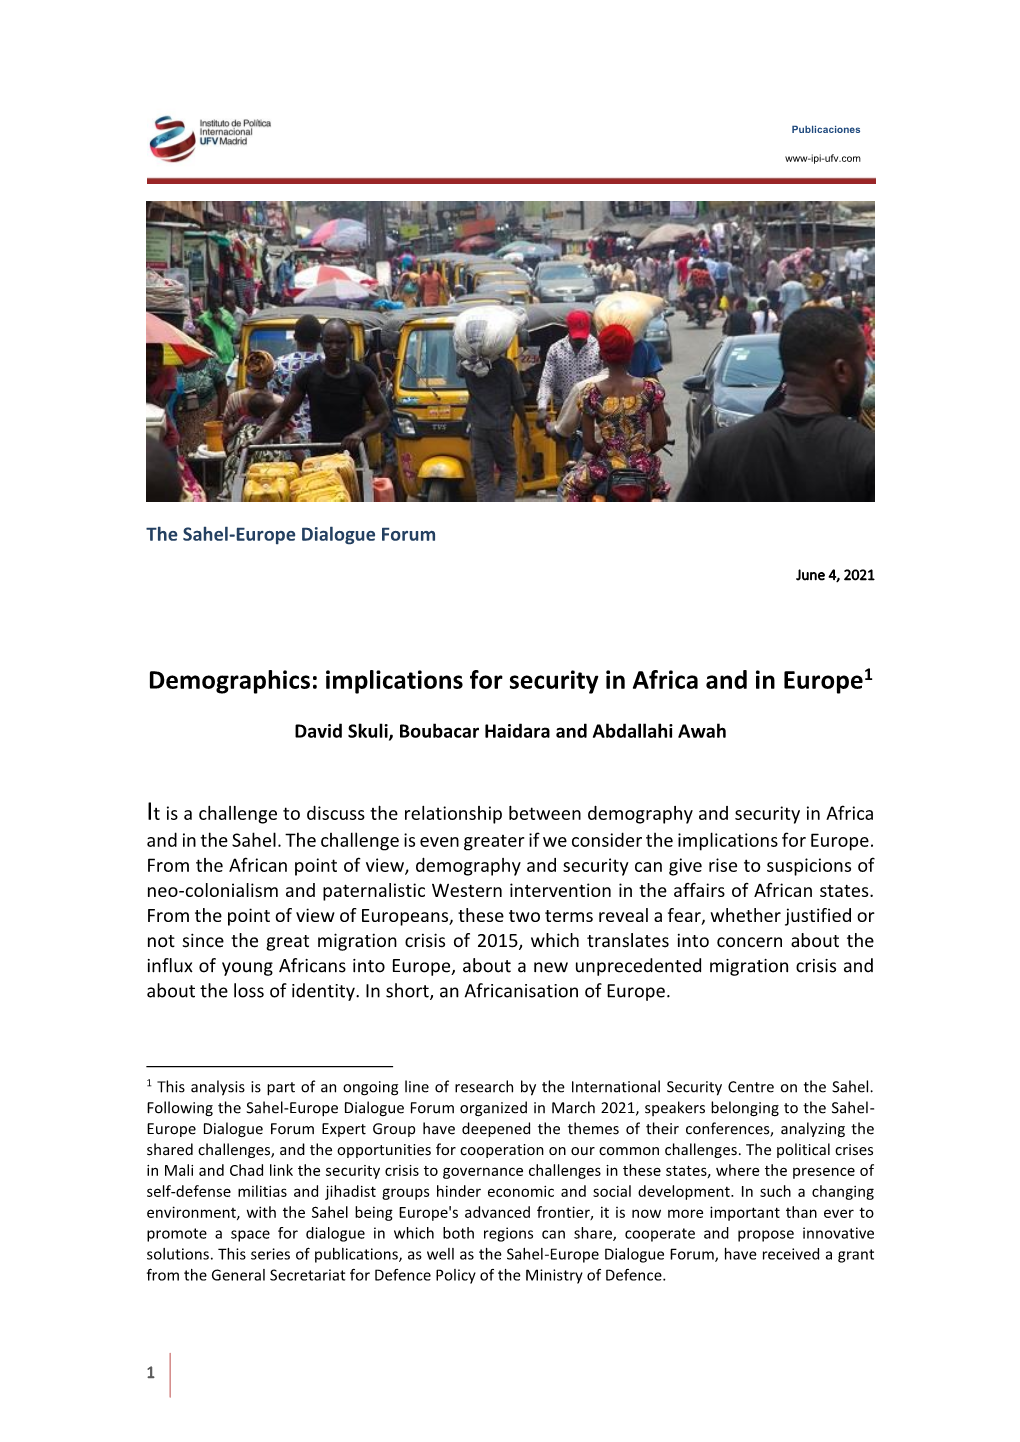 Demographics: Implications for Security in Africa and in Europe1